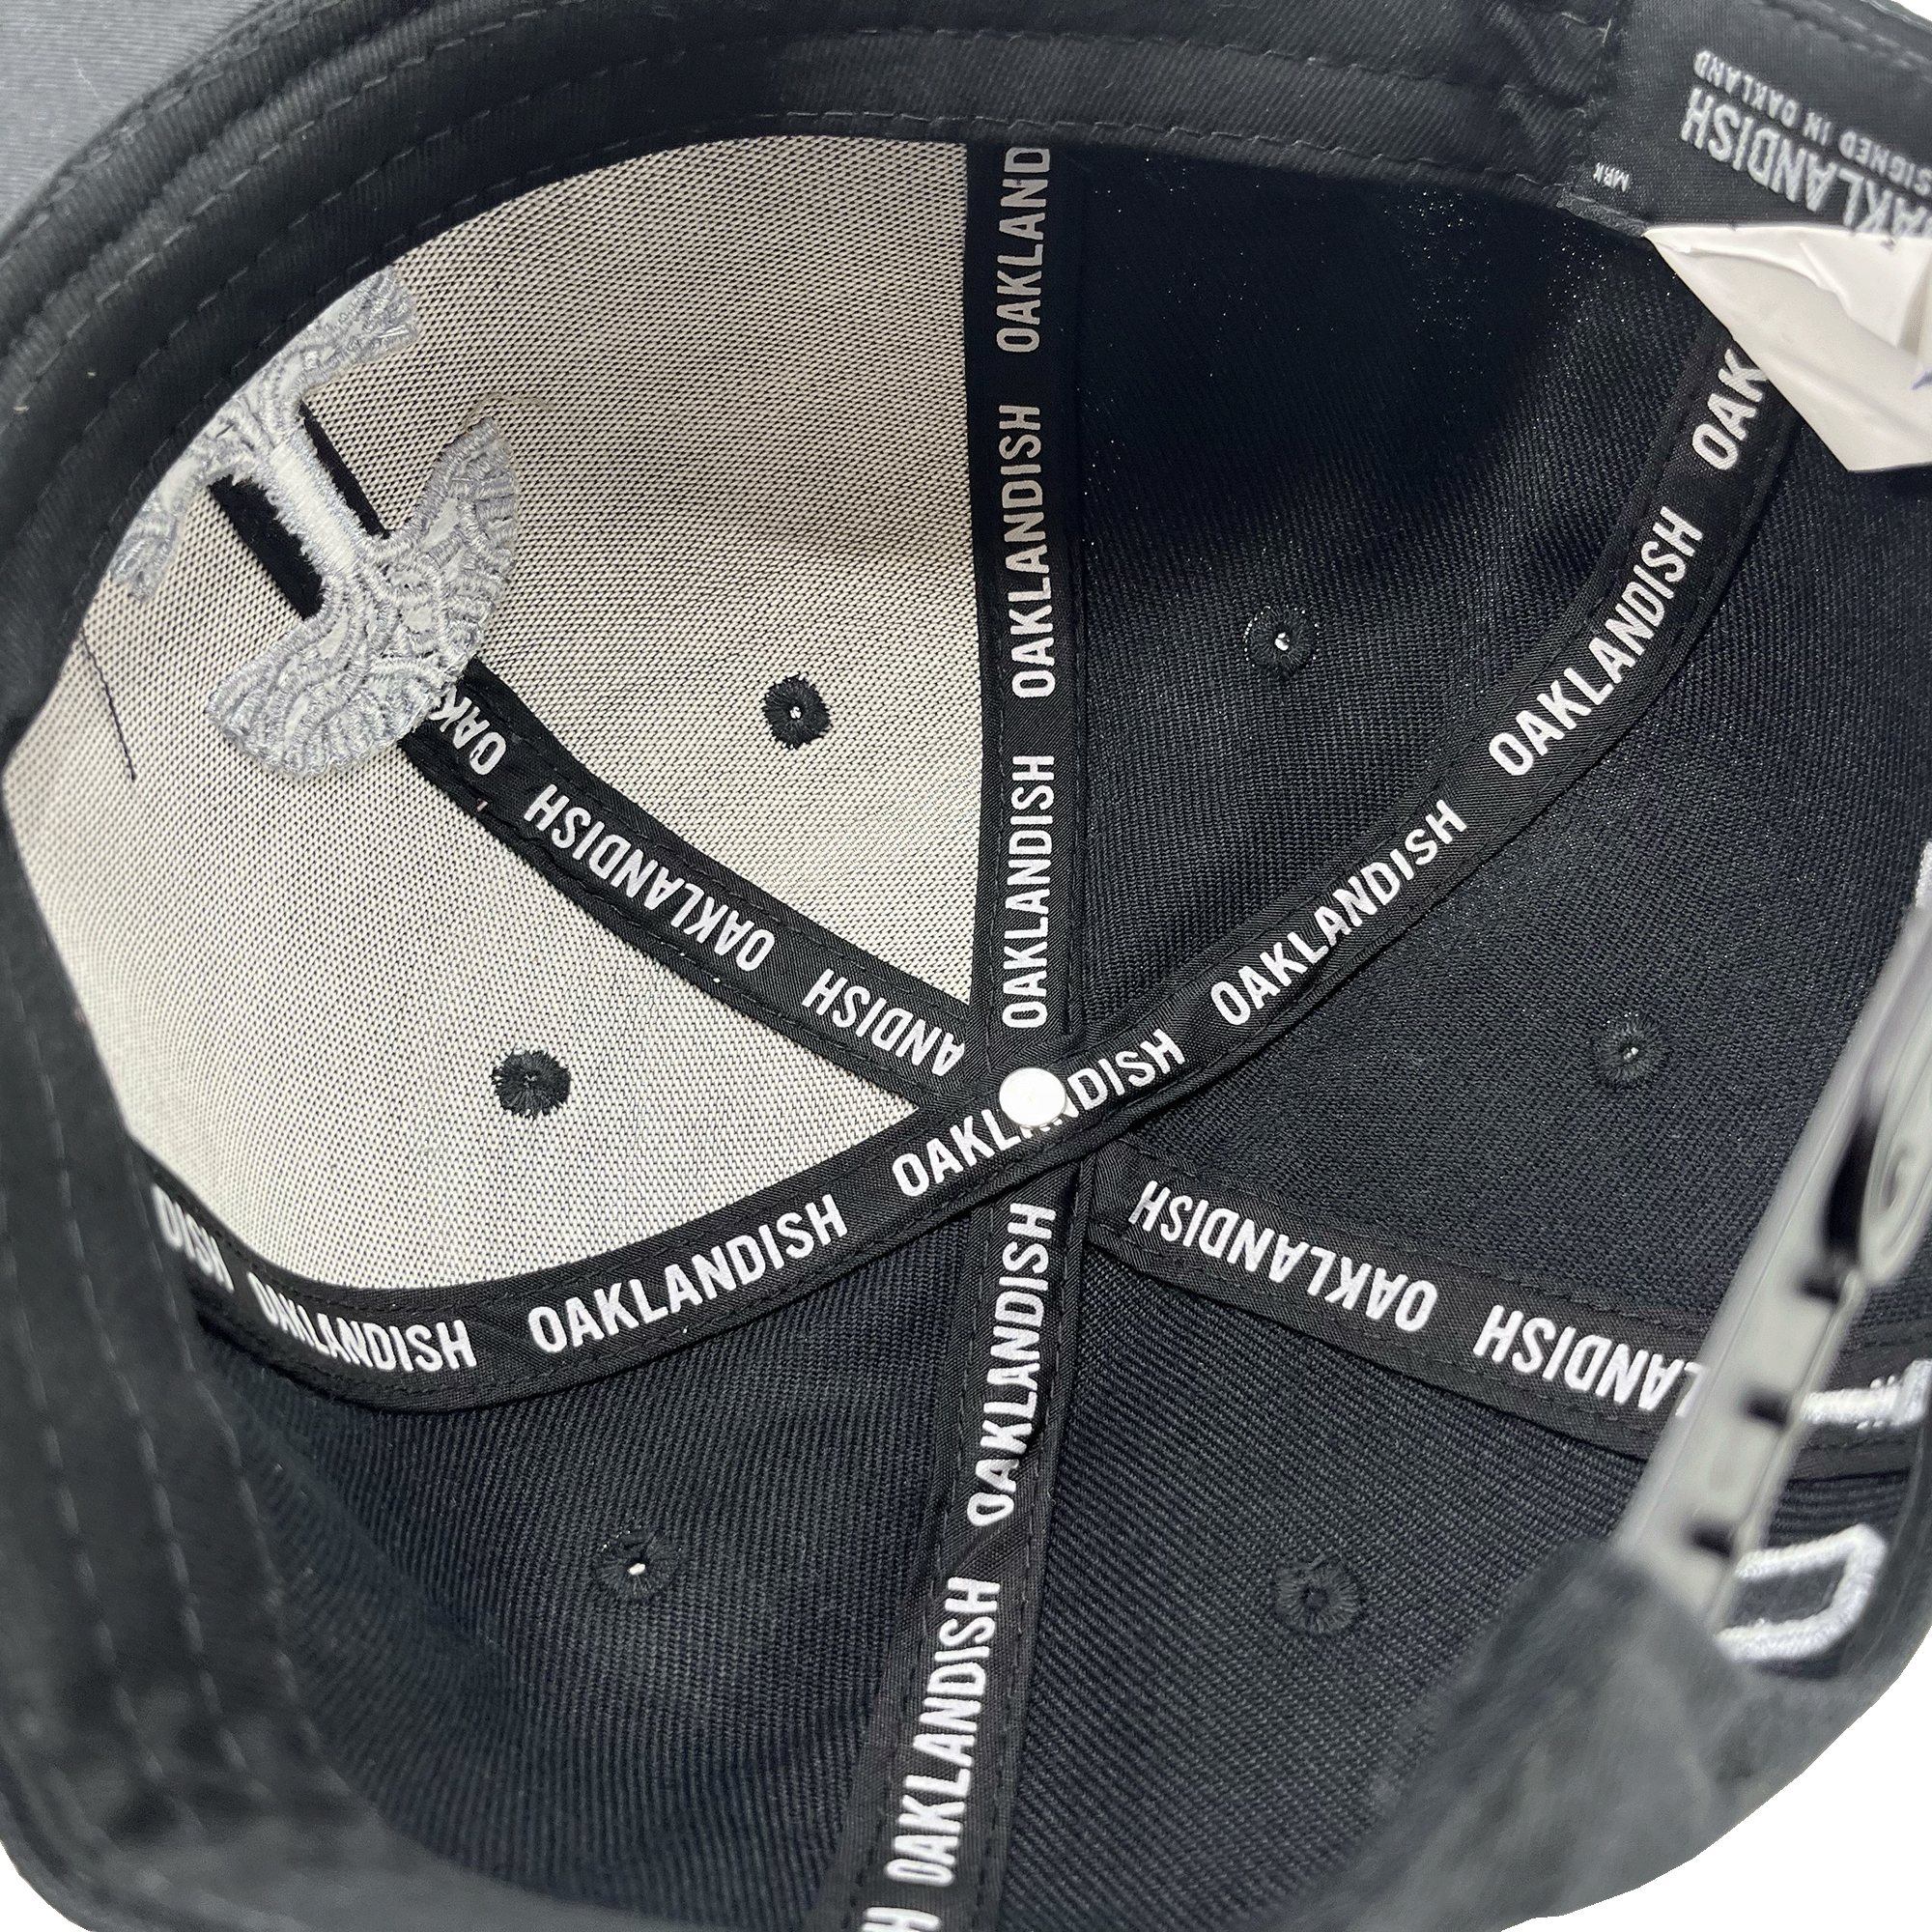 View of the inside of the crown with black striping with Oaklandish wordmark on repeat.